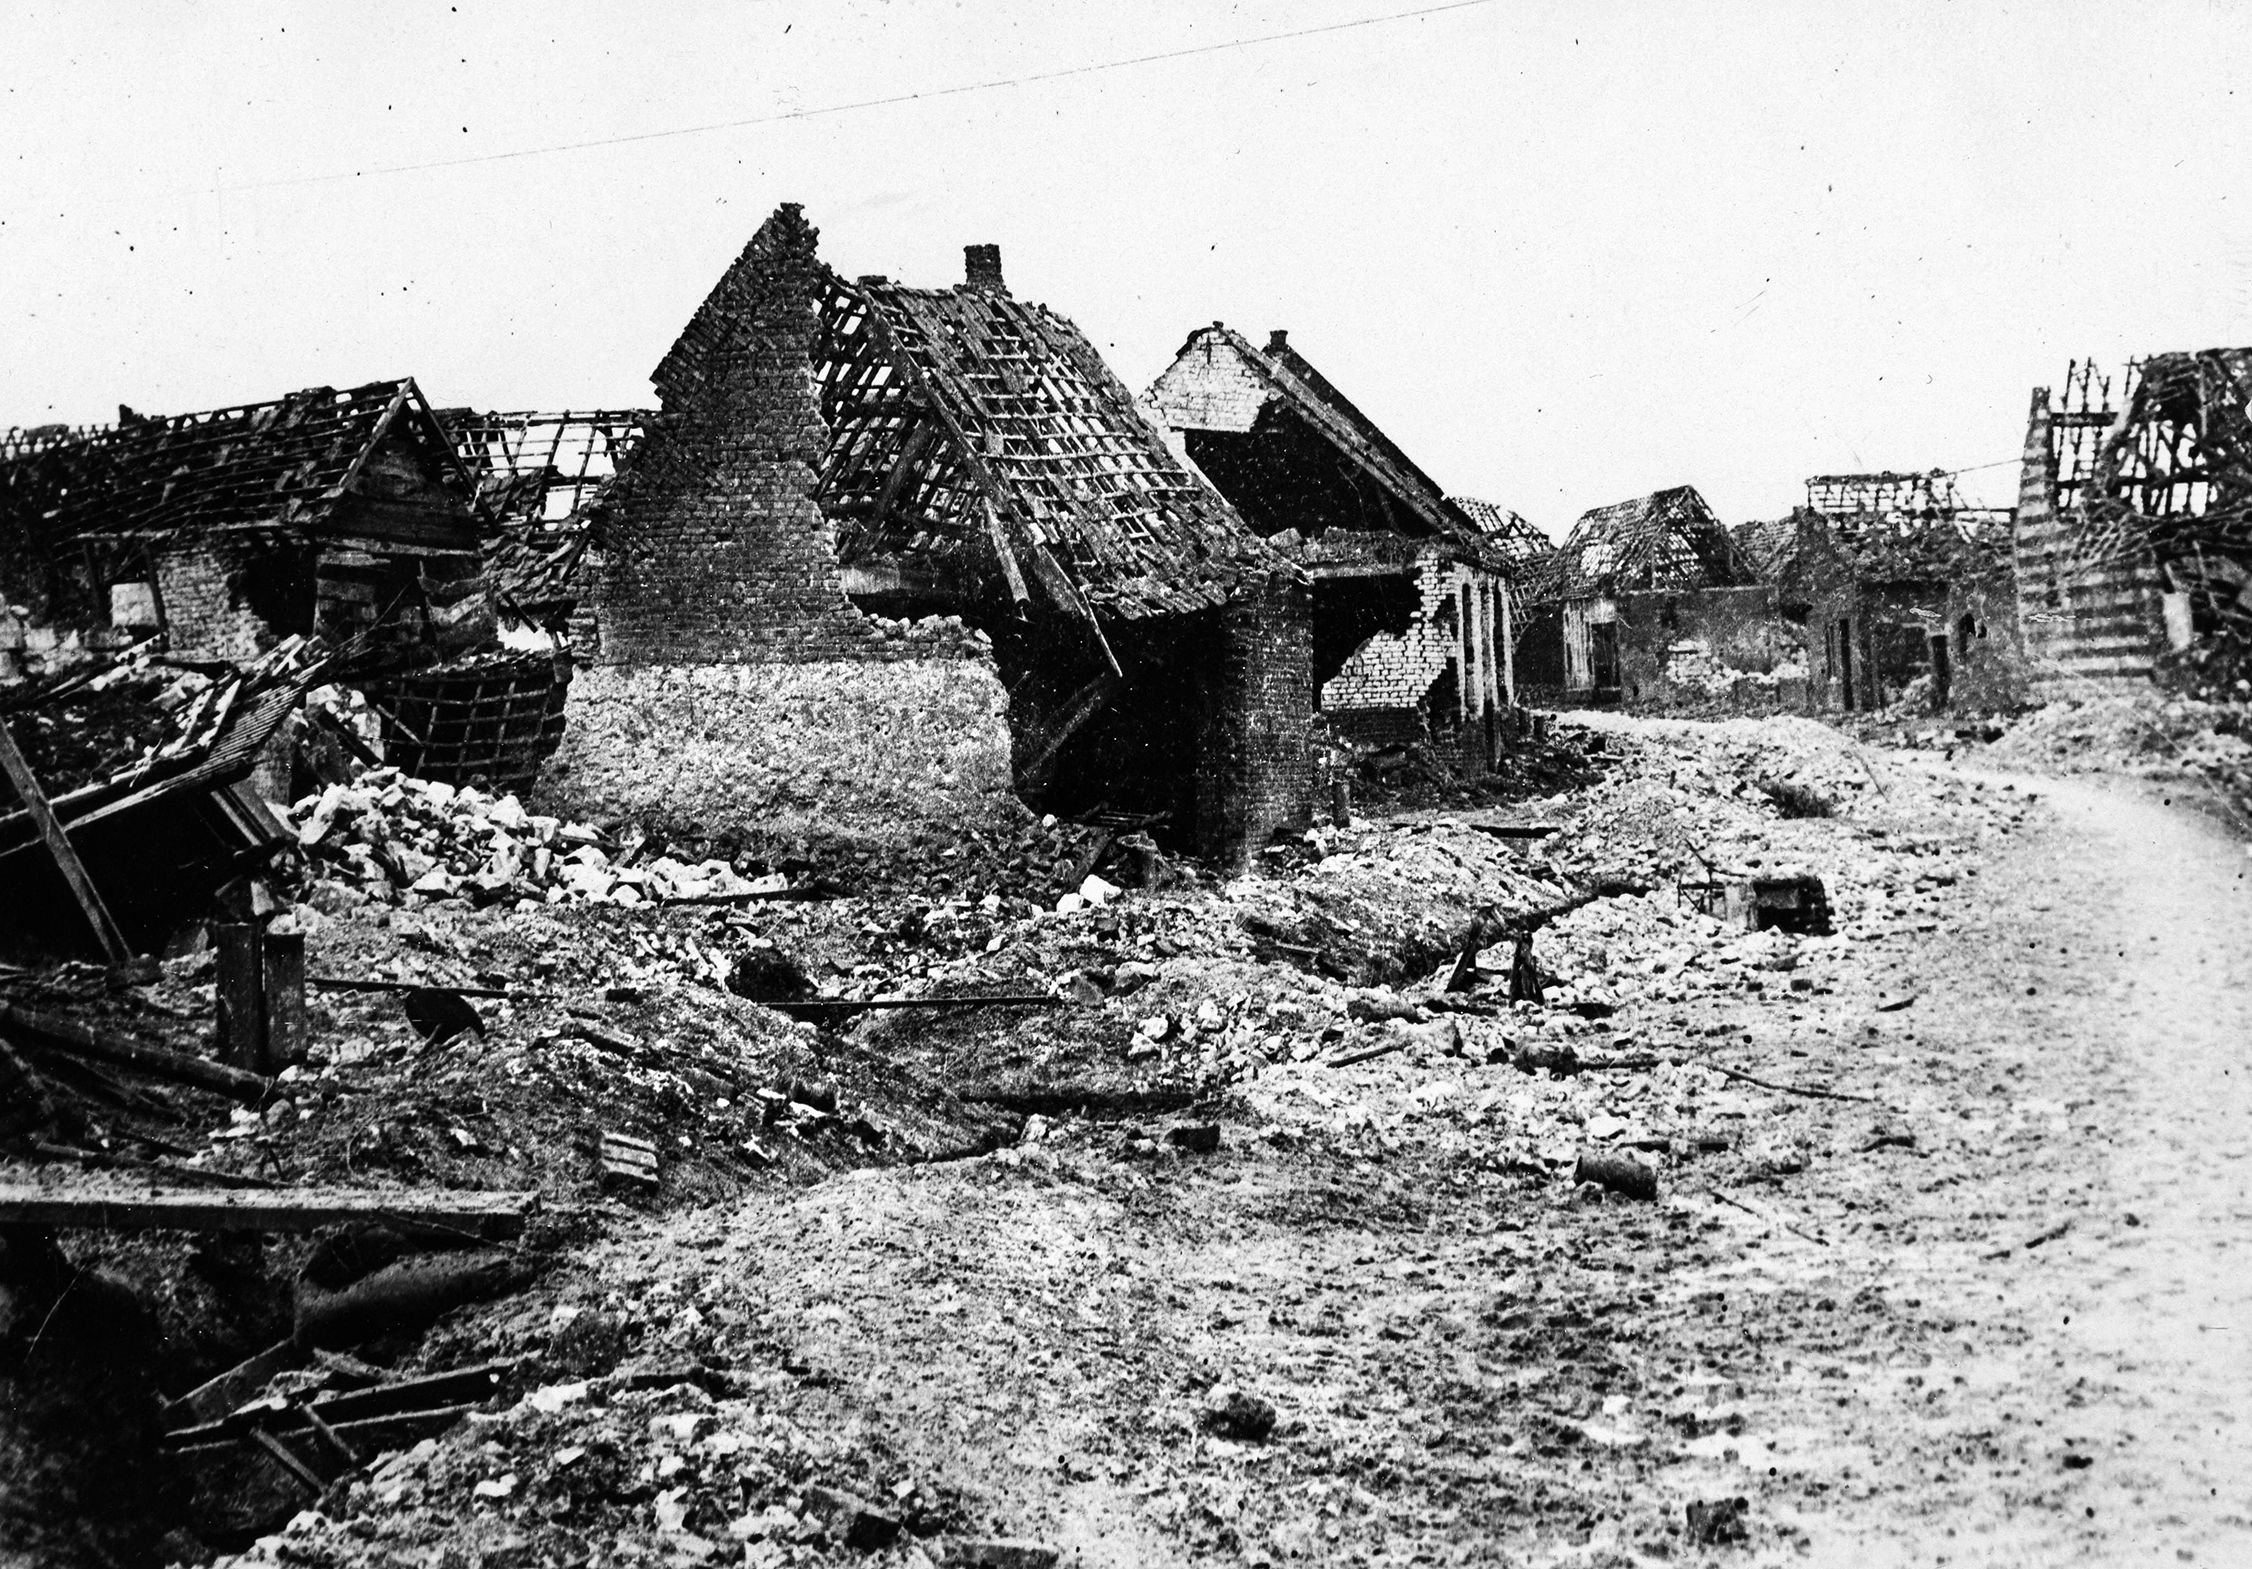 Ruins of the village of Loos, France, where men of the British 15th (New Scottish) Division fought the Germans with bayonets and hand grenades.